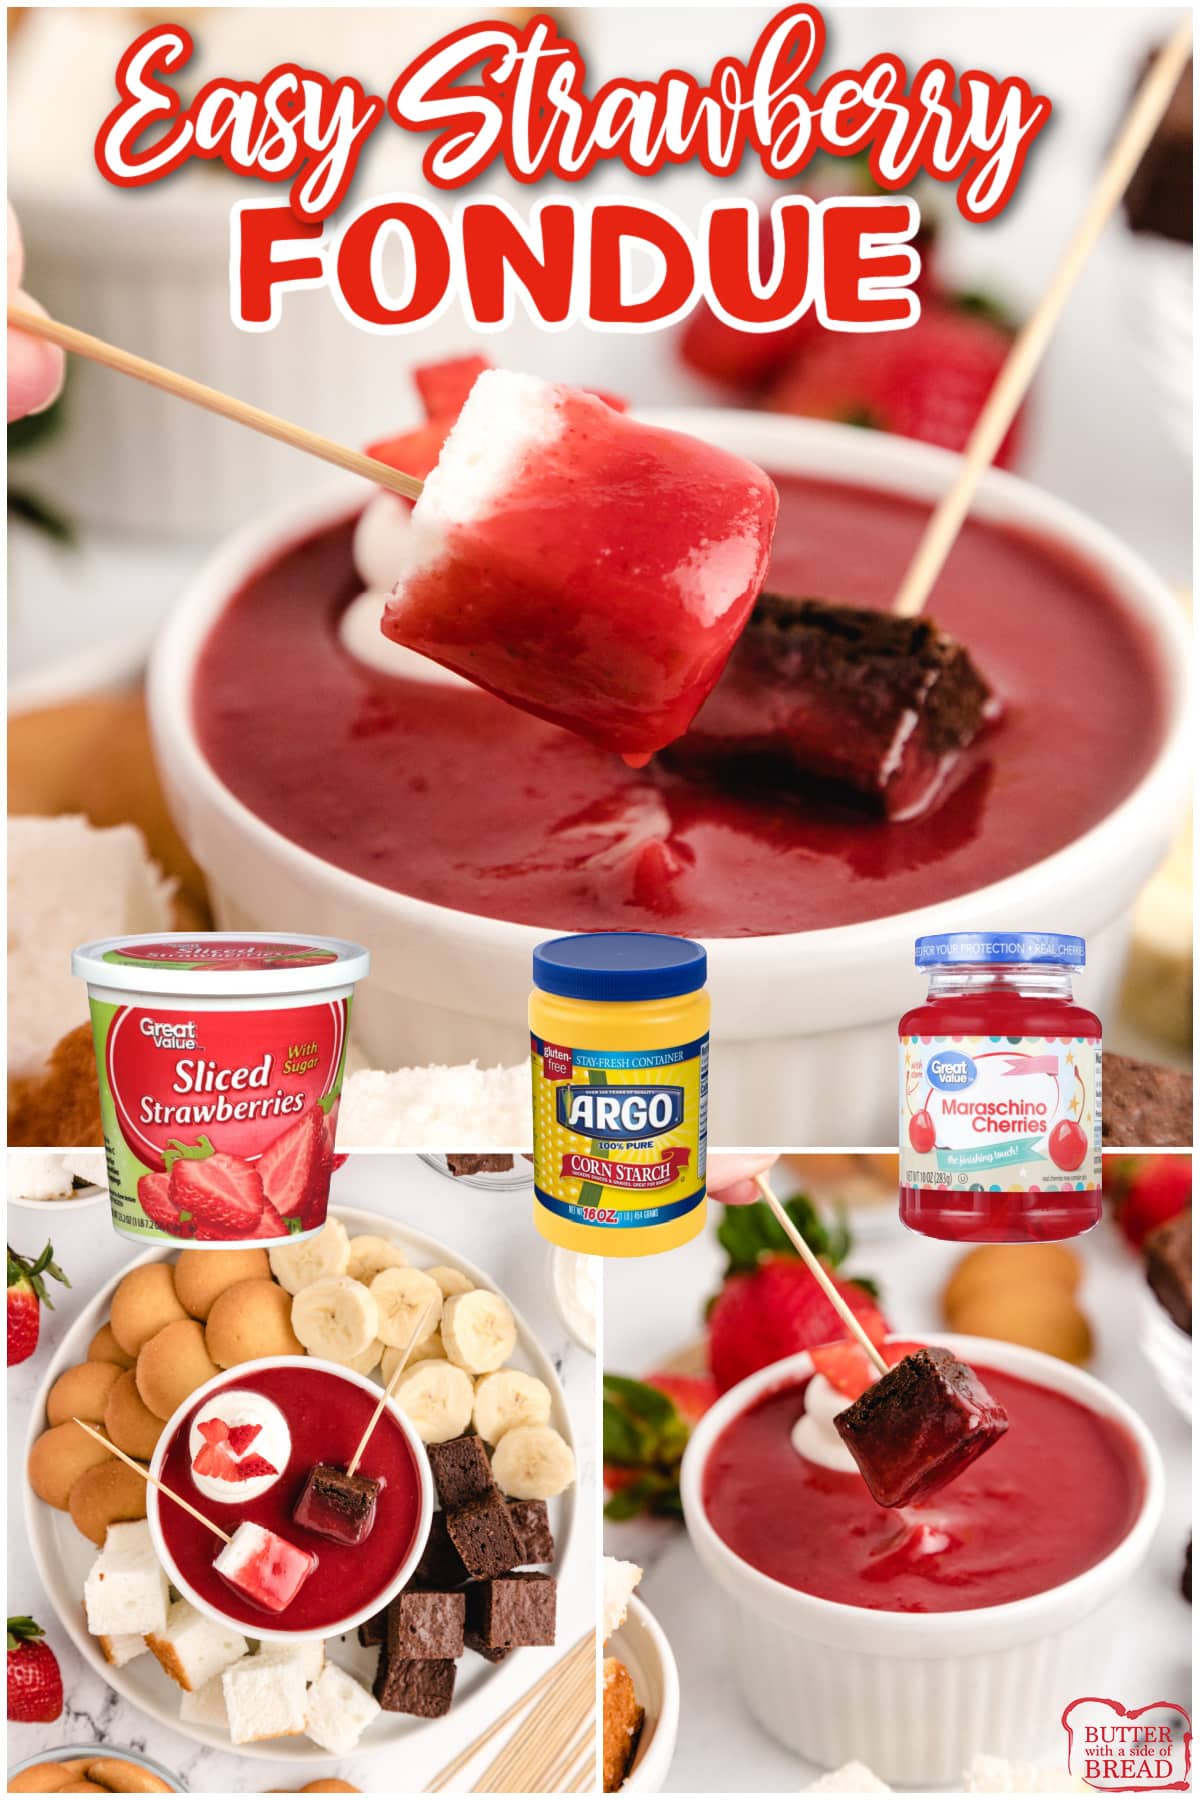 Easy Strawberry Fondue is a light, refreshing and super easy dessert that tastes simply divine. The options for dippers for this easy fondue recipe are endless, it pairs well with so many options!